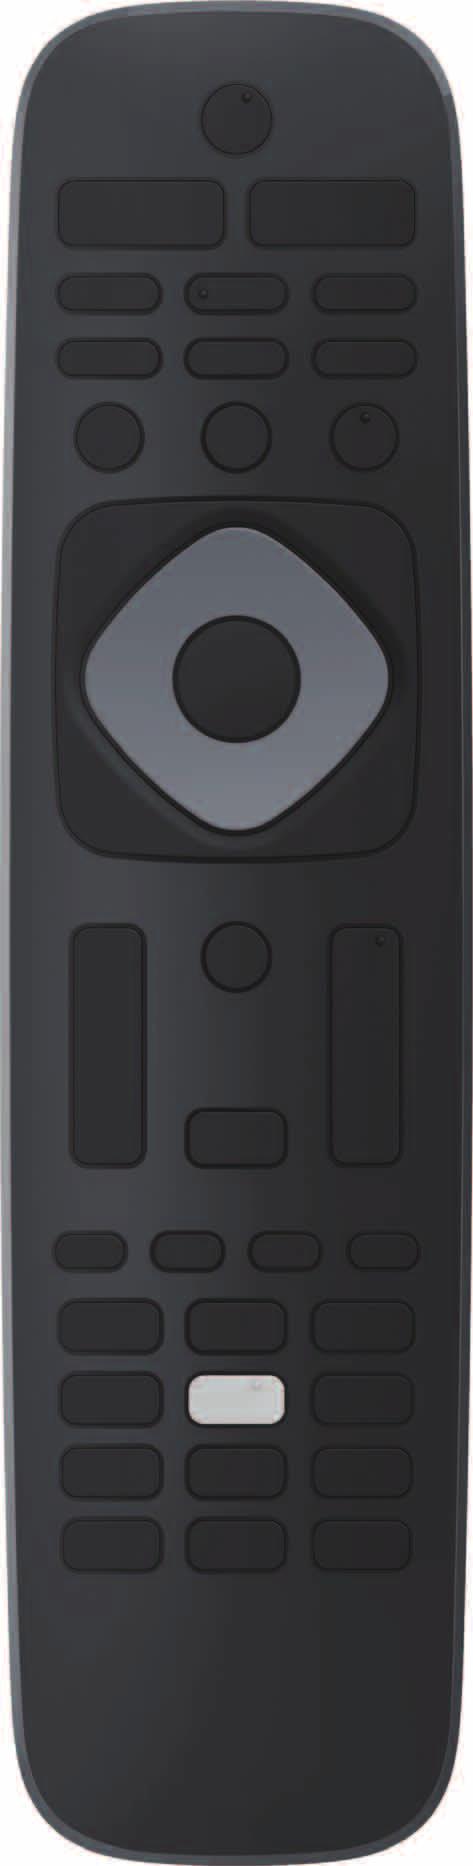 9.English Remote control t s r q p o n a b c d e f g h i j k l m (POWER) Turns the TV on from standby or off to standby. YouTube Access directly to YouTube.